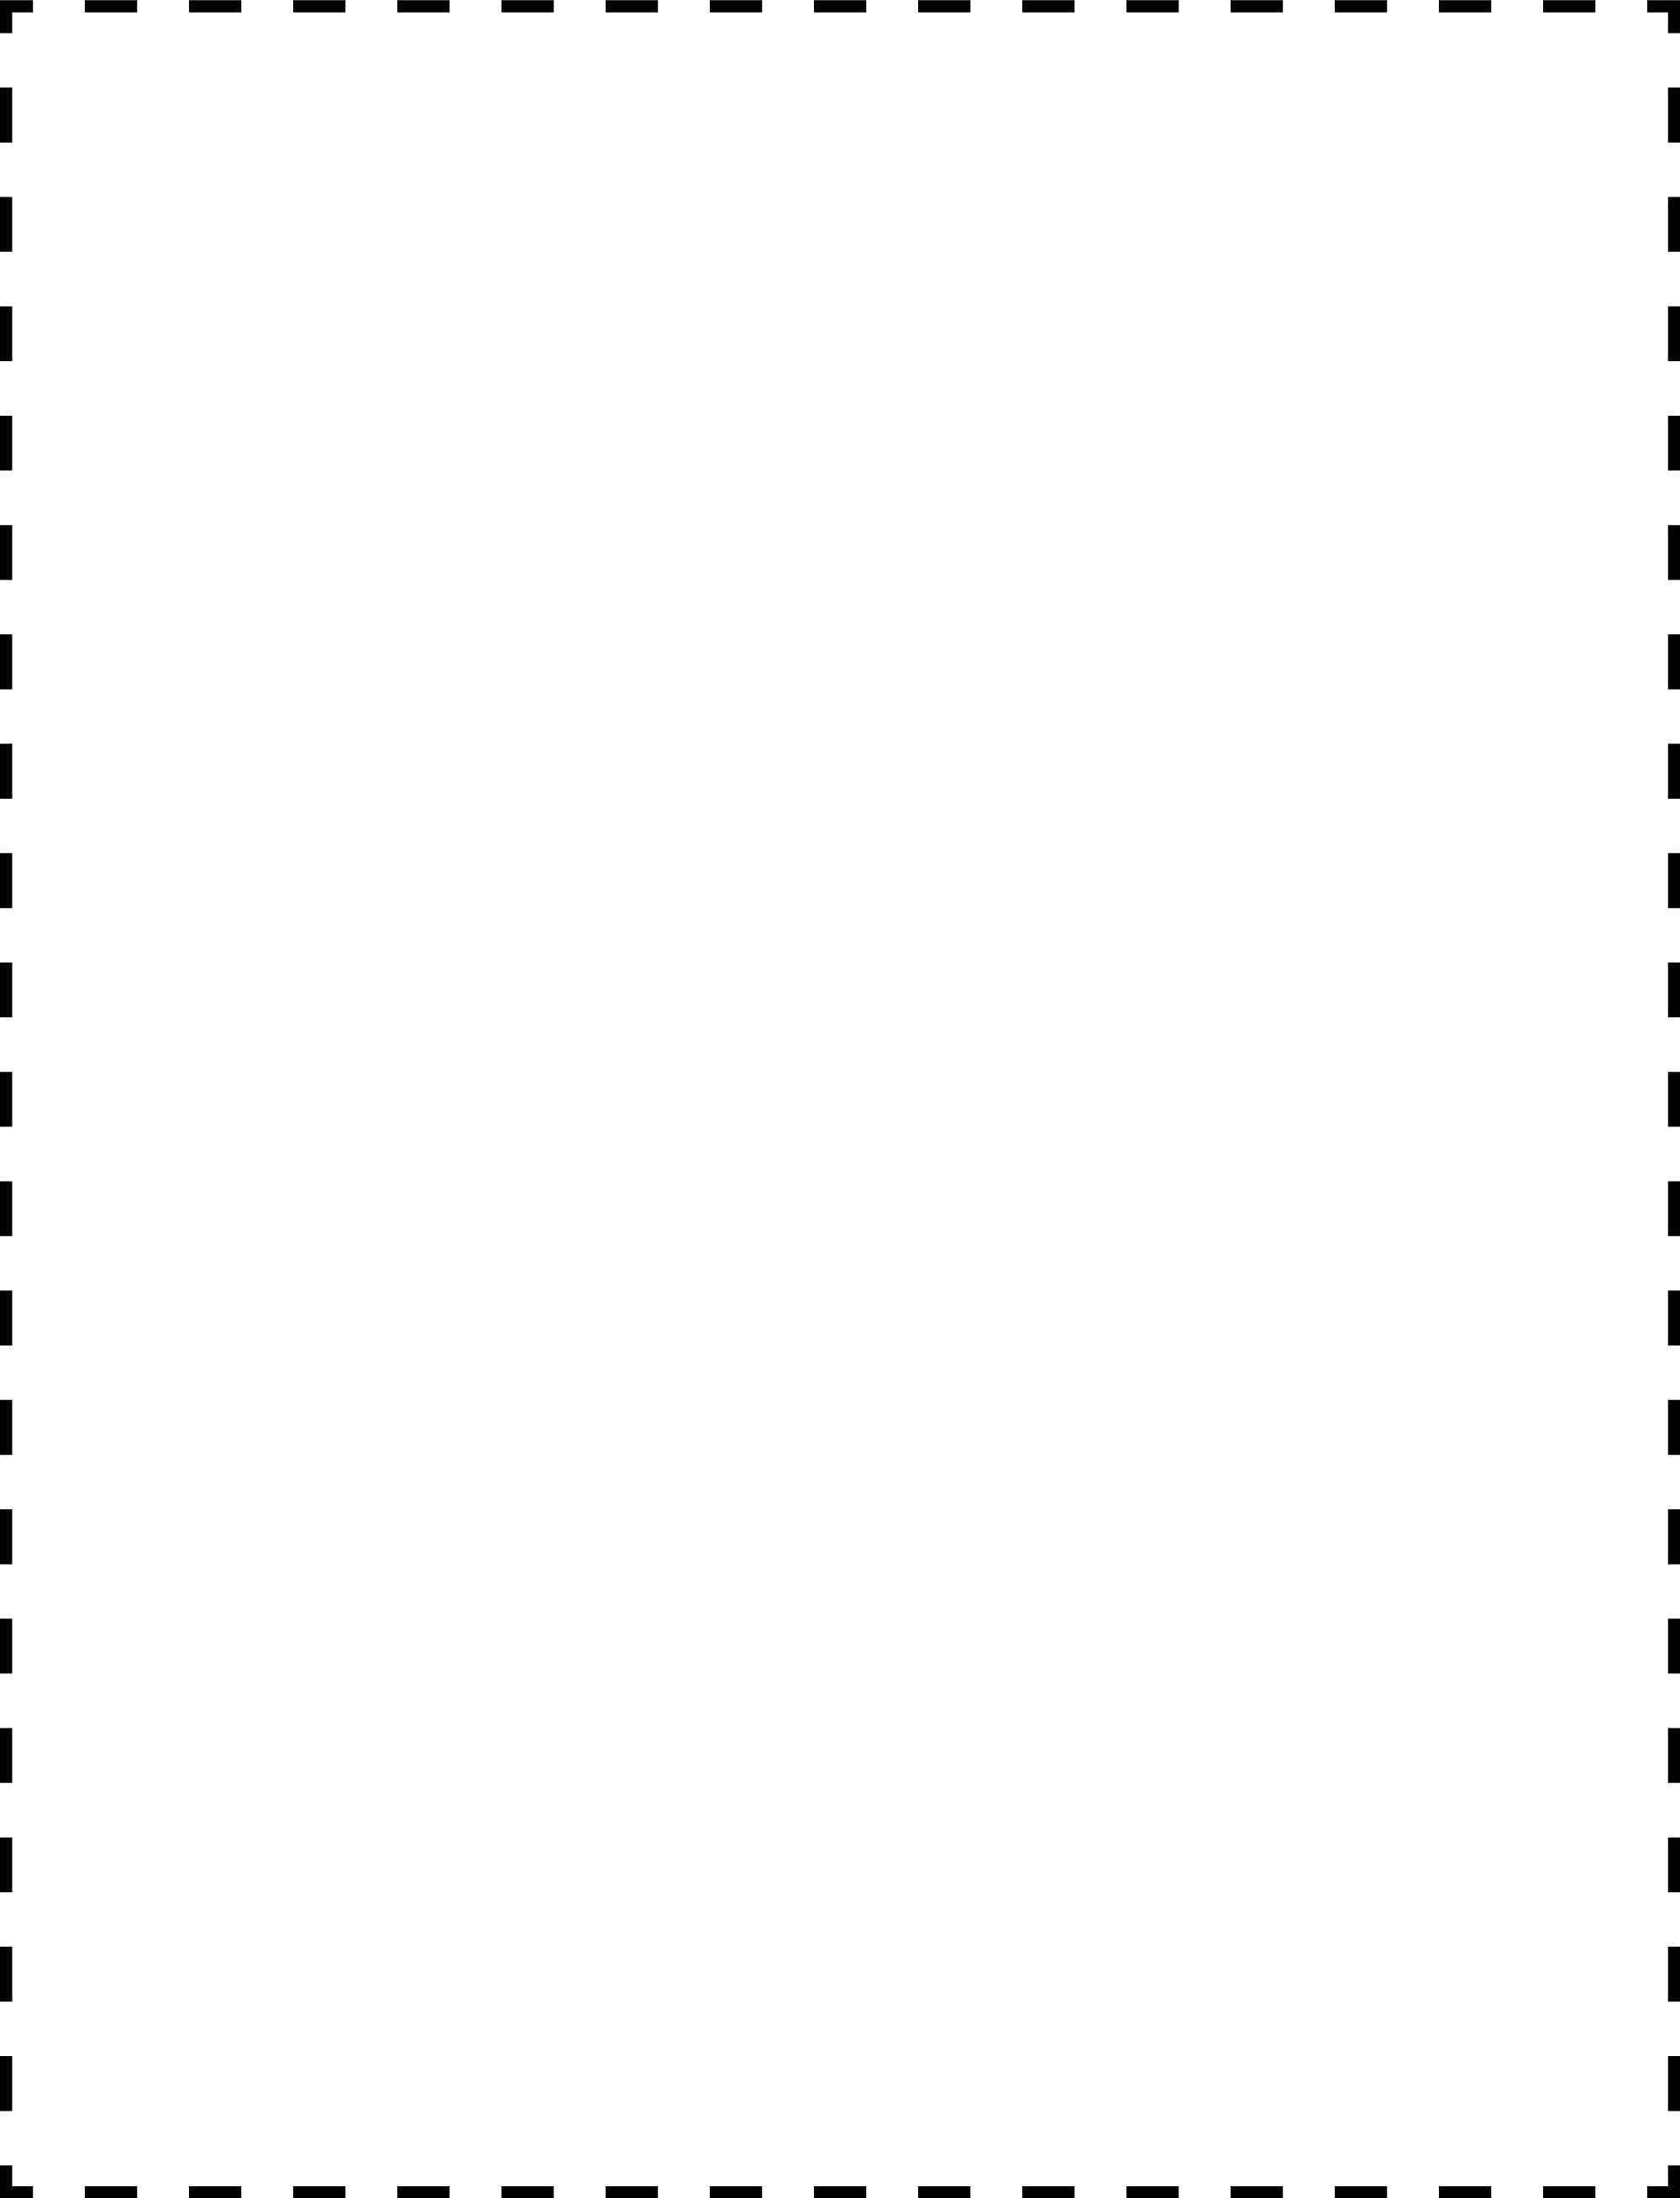 603-2340-coupon-outline-4x5-k.png